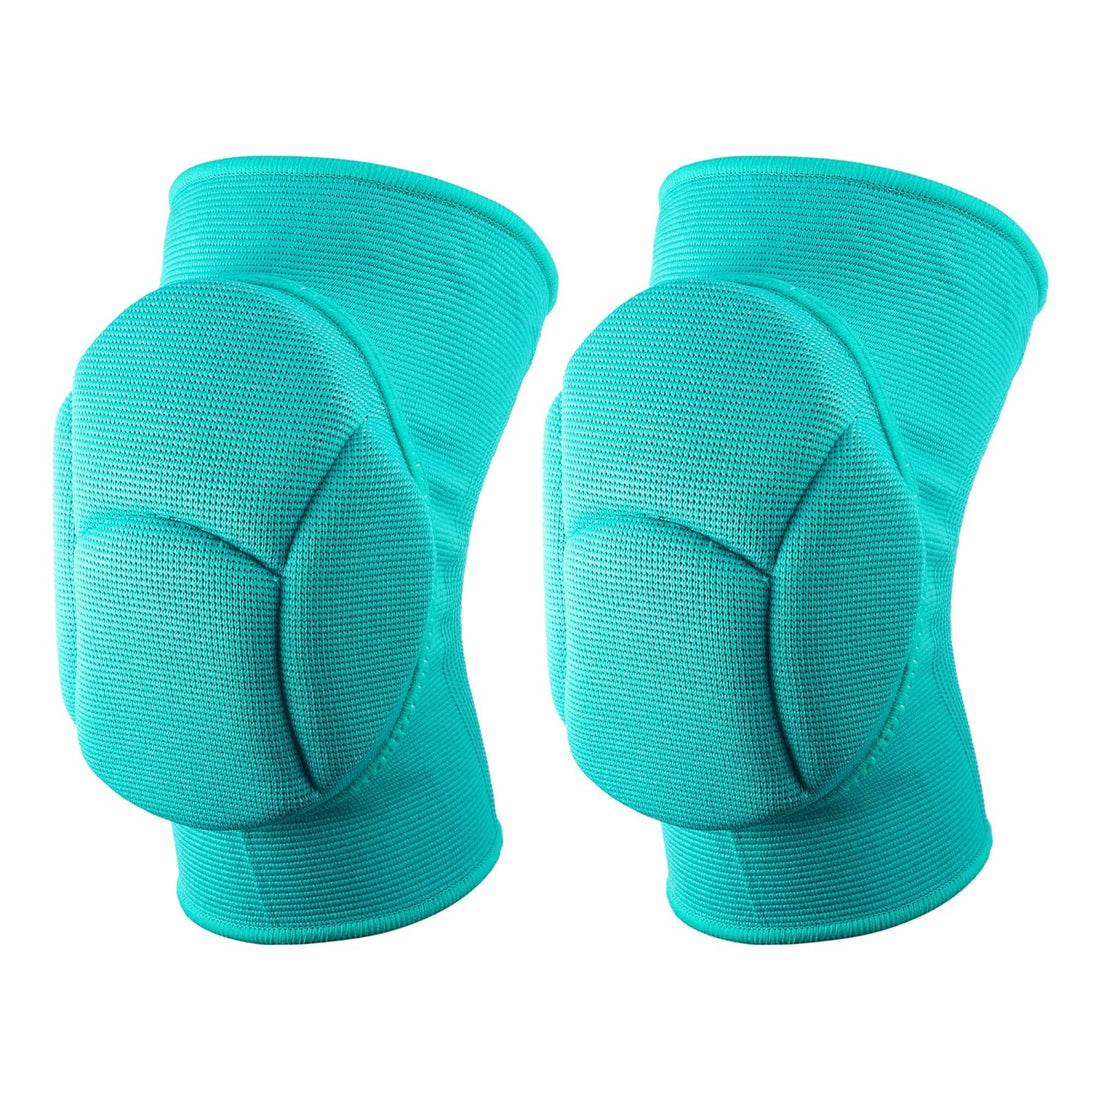 VOCOSTE 1 Pair Sporting Protective Knee Pad, Breathable Flexible Knee Support Compression Sleeve Brace, for Football Volleyball, Polyester, Green Size S